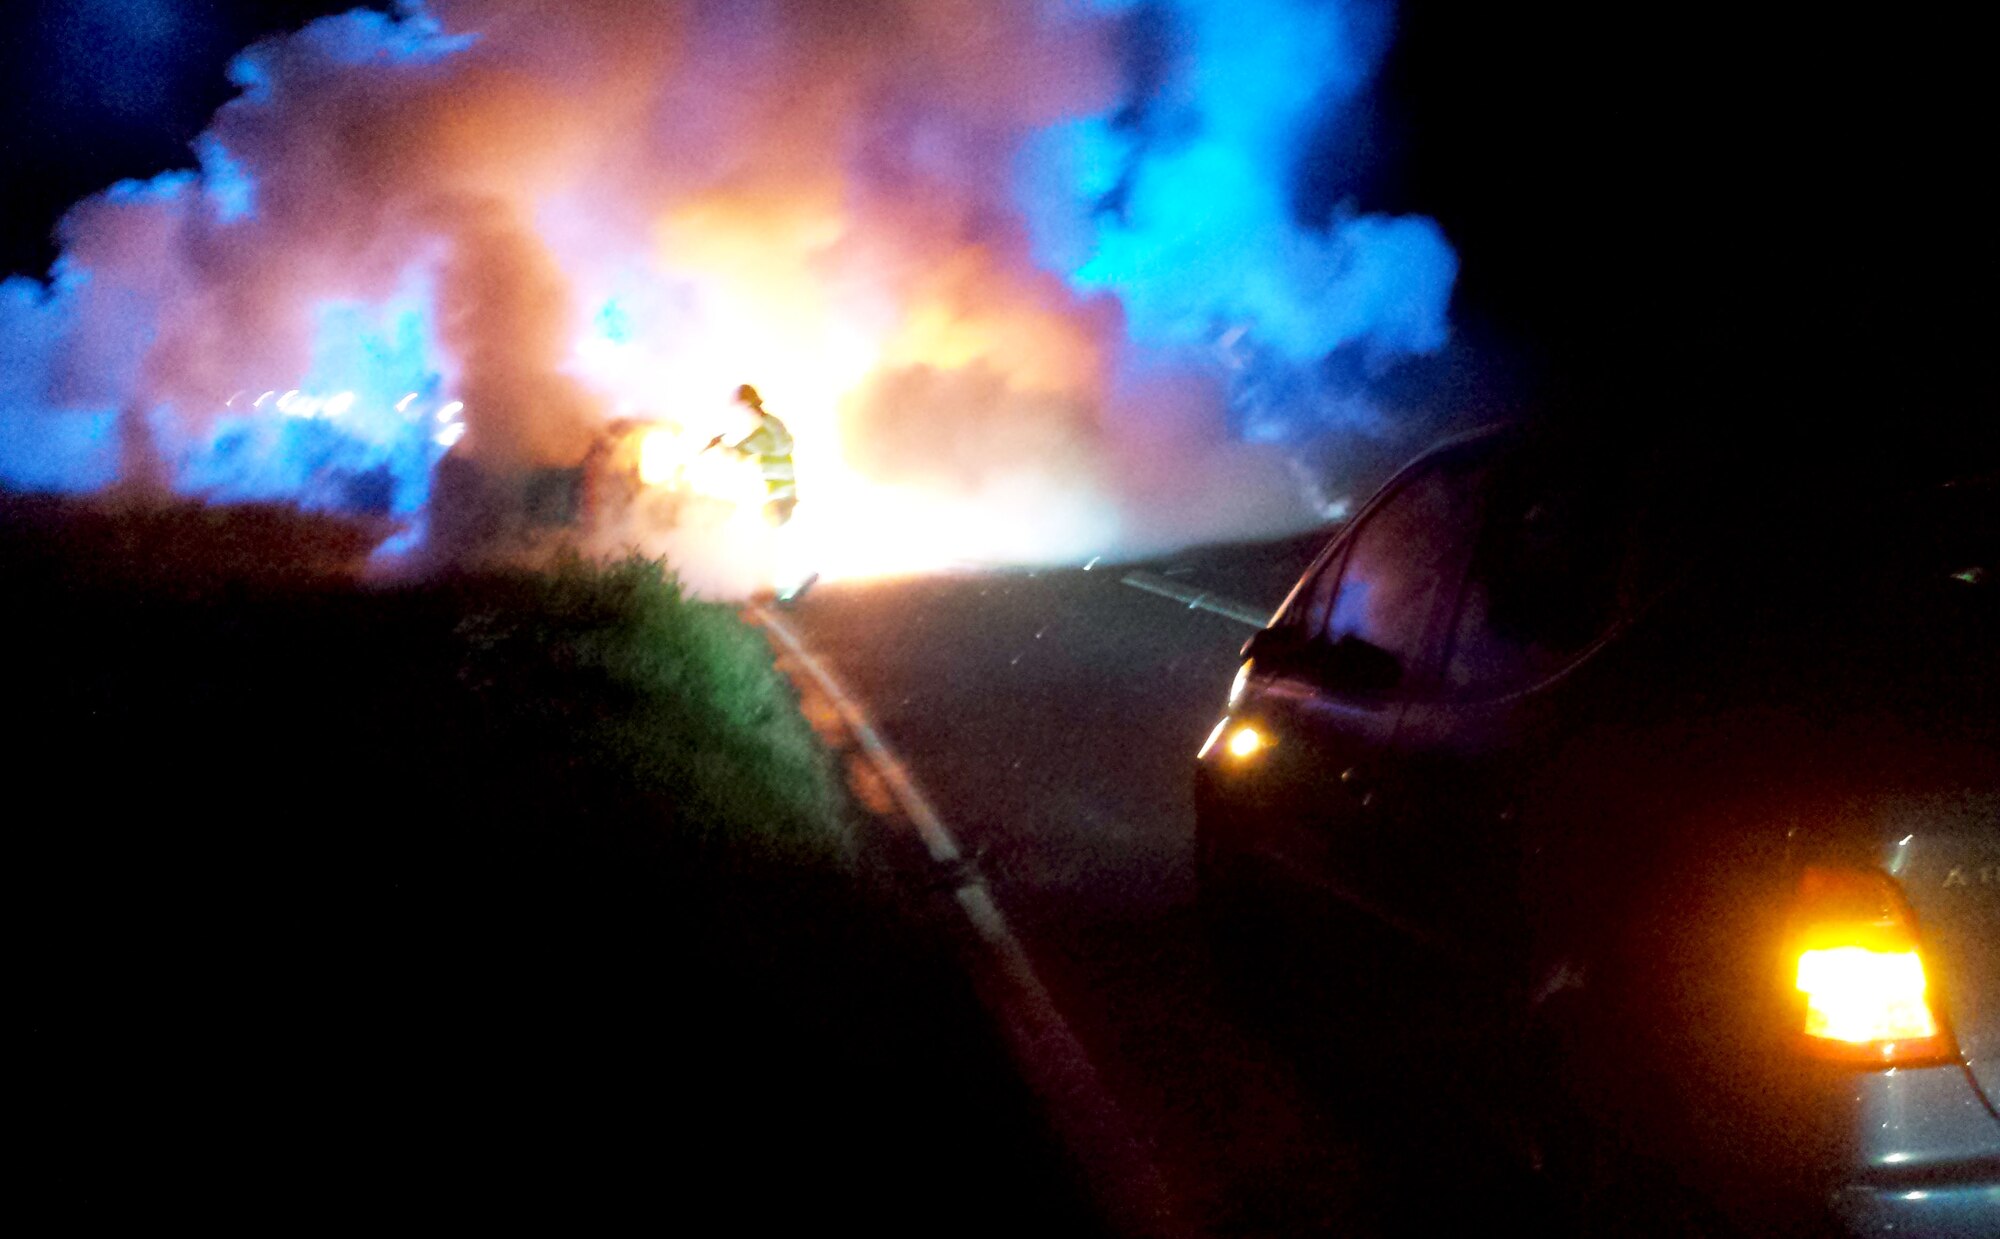 A vehicle is engulfed in flames after being involved in a three-car accident May 12, 2014, near Royal Air Force Mildenhall, England. Staff Sgt. Vicente Gomez, a 100th Aircraft Maintenance Squadron crew chief, performed life-saving assistance to the victims of the crash. Gomez was presented with the Airman’s Medal for his courageous acts. (Courtesy photo)